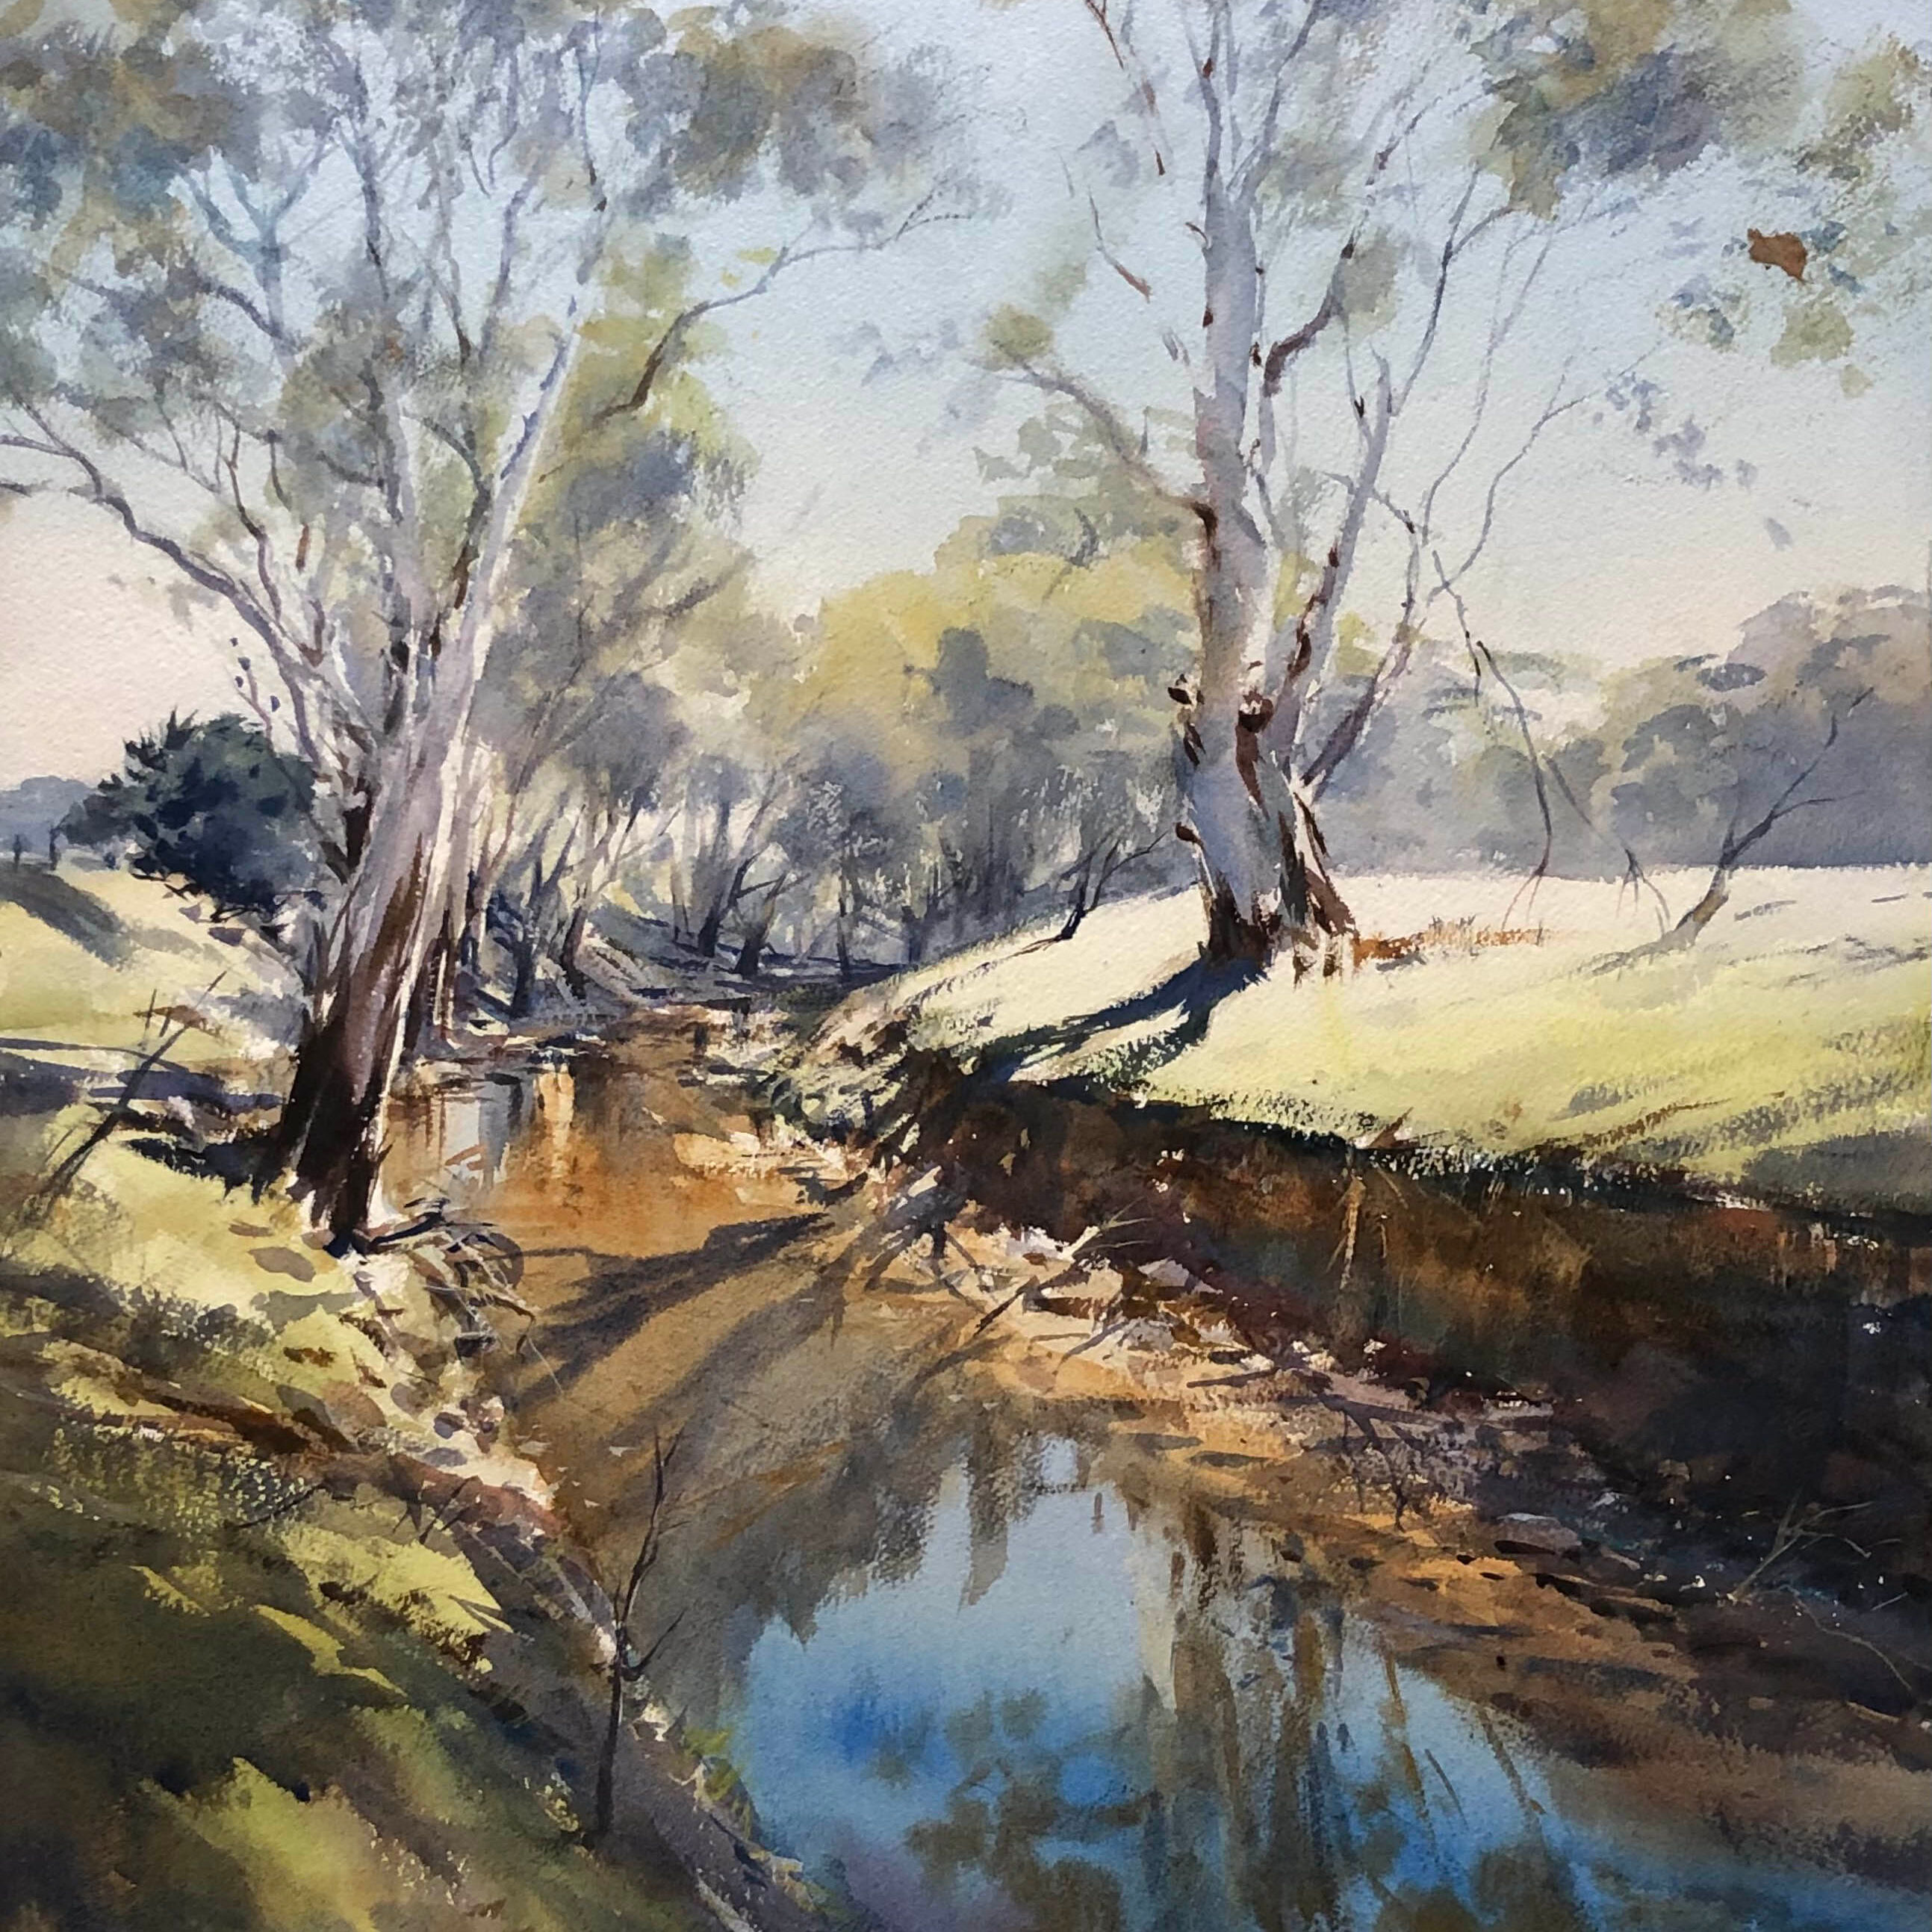 Sun after Frost Bang bang creek By David Taylor A.W.I.F.V.A.S Size 99 cm x 82 cm $4,000